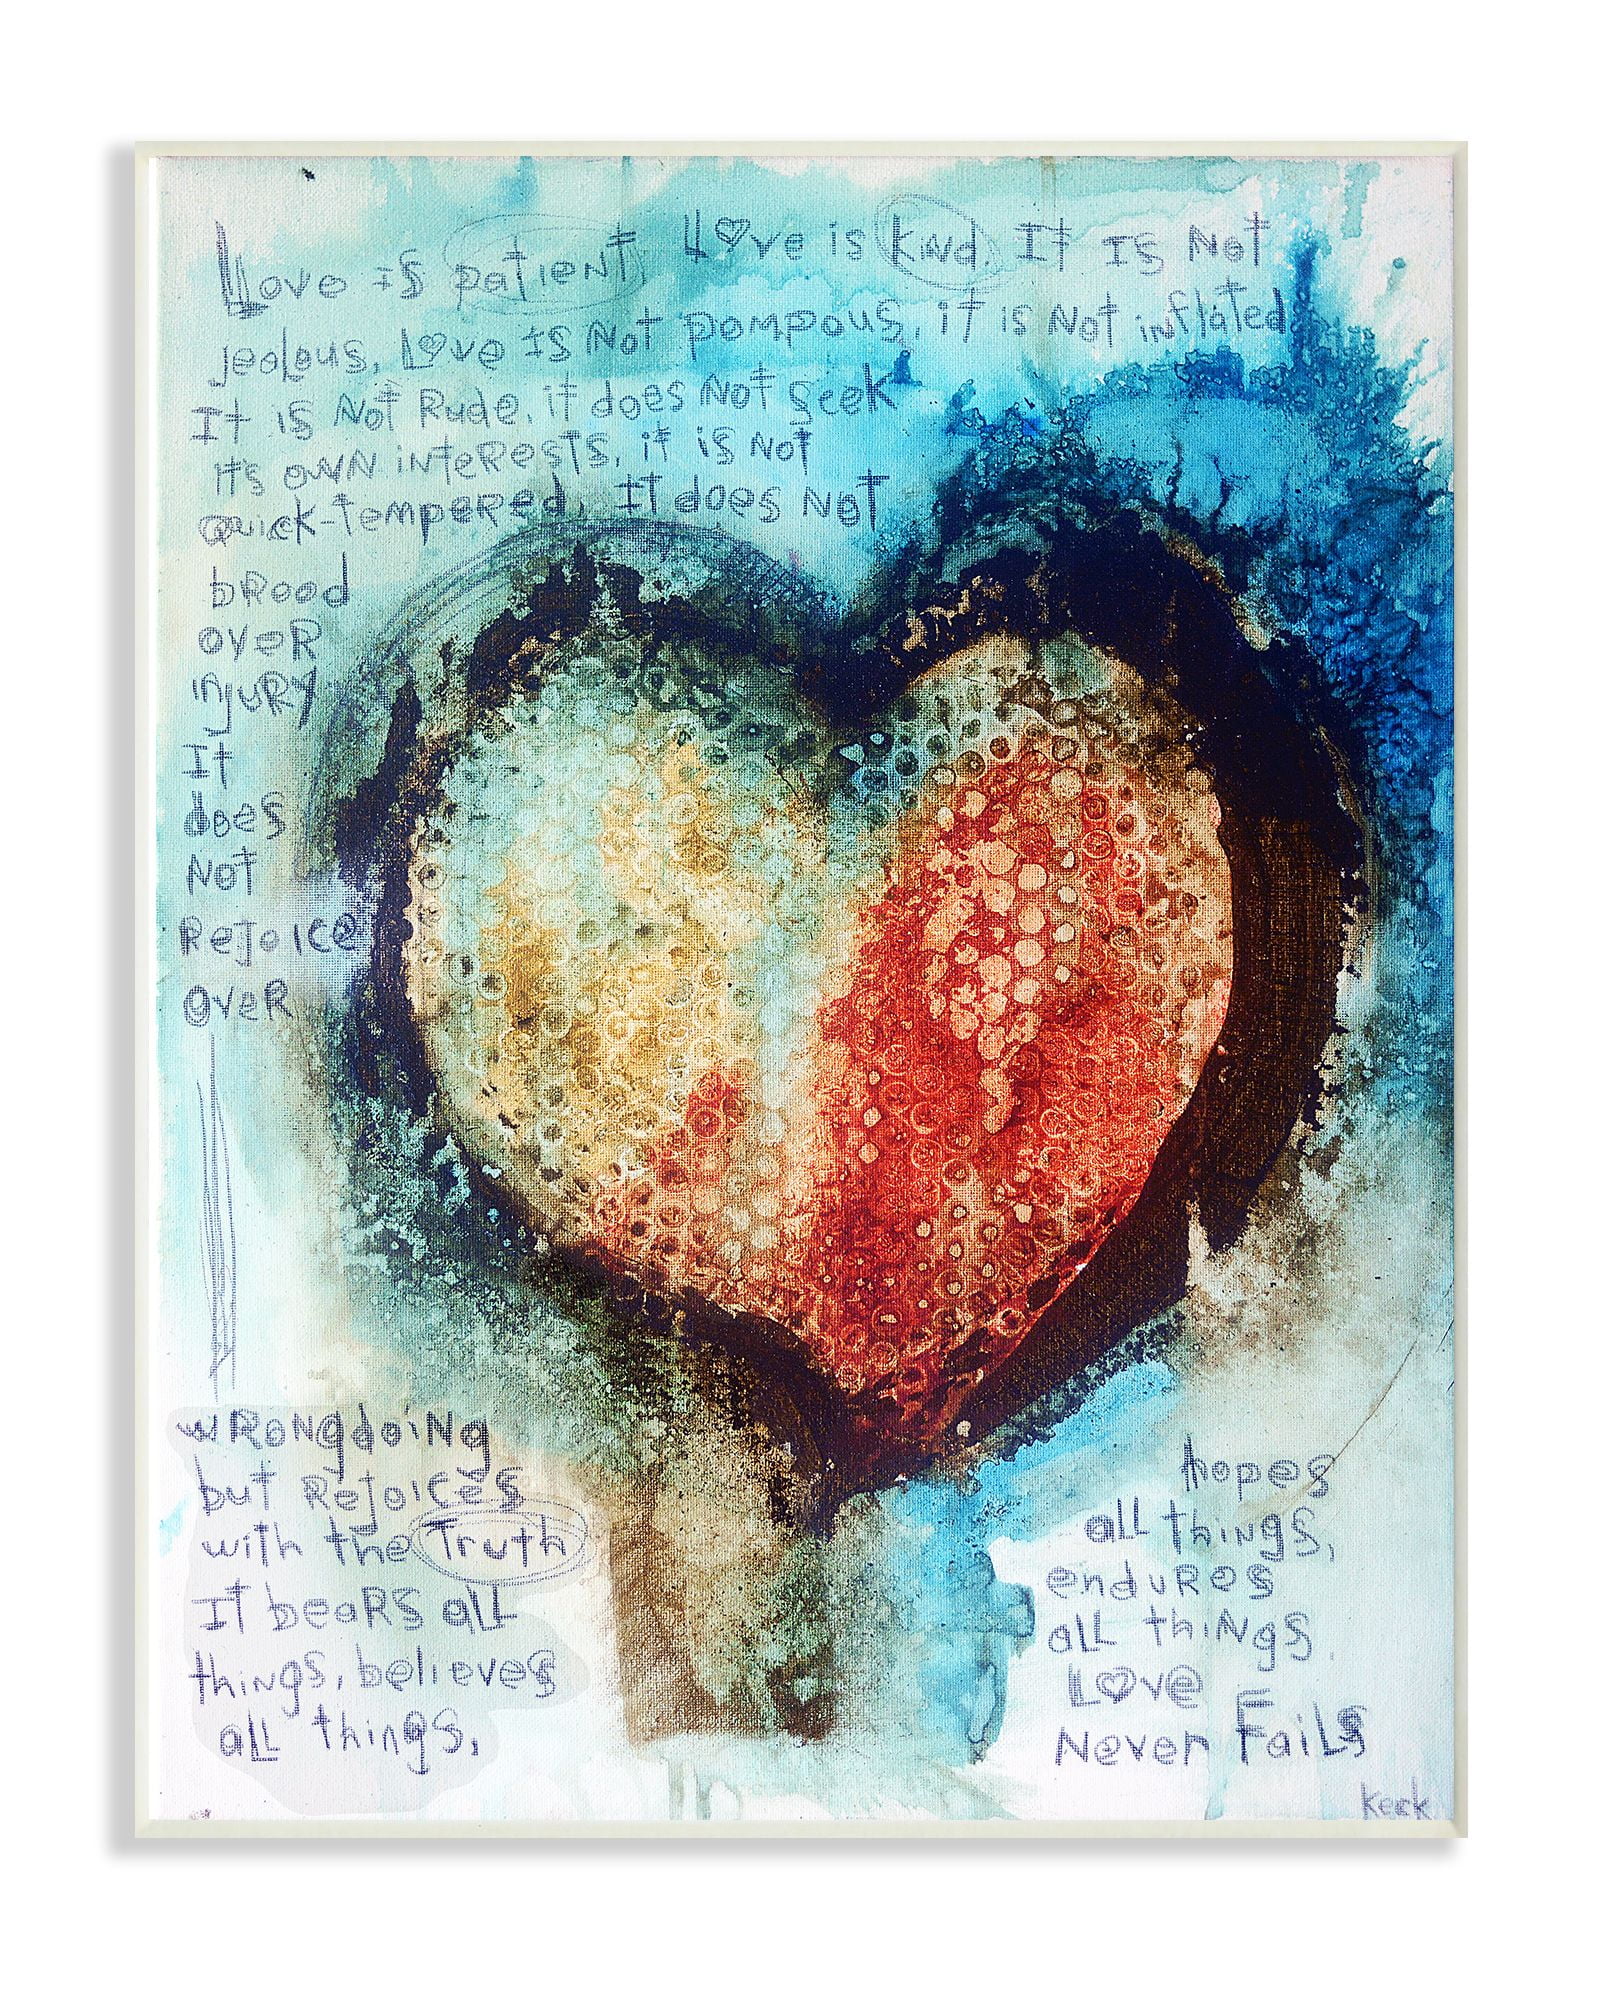 The Stupell Home Decor Blue Heart and Texturized Art Collage Painted Framed Words Red Over Art